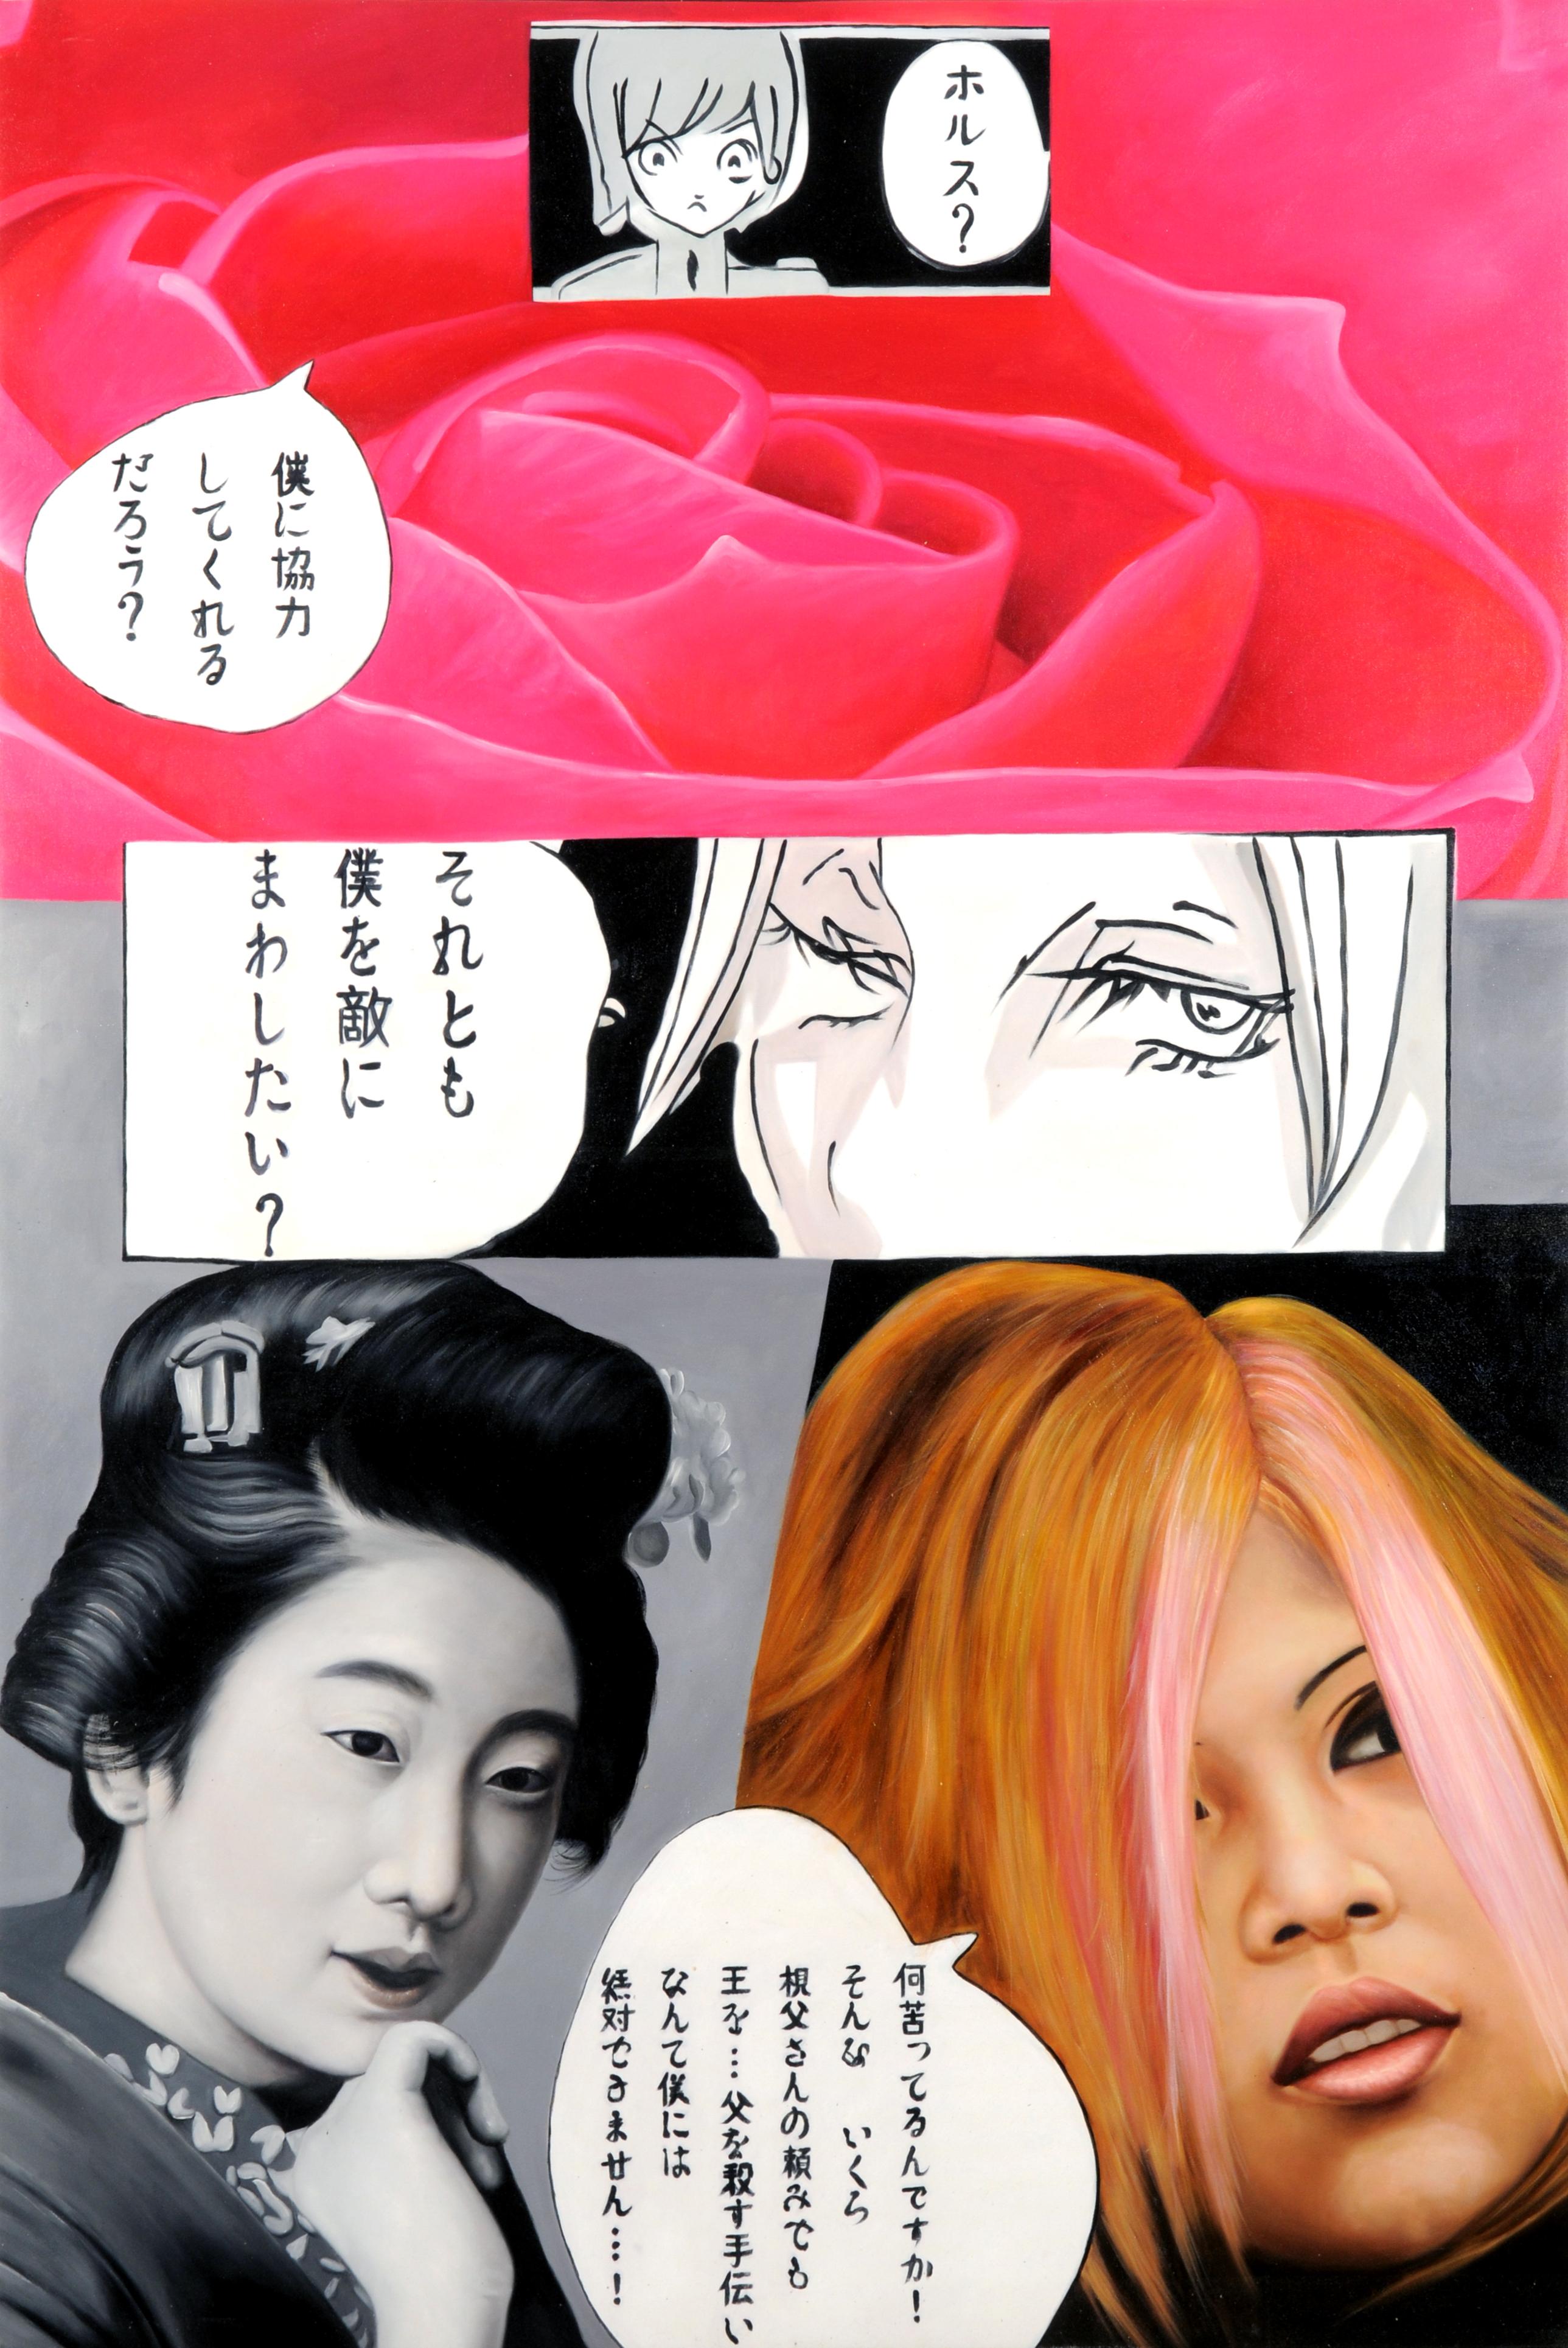 Face to Face : Convergence of Worlds, Tradition and Manga in Dialogue - Painting by JIMMY YOSHIMURA